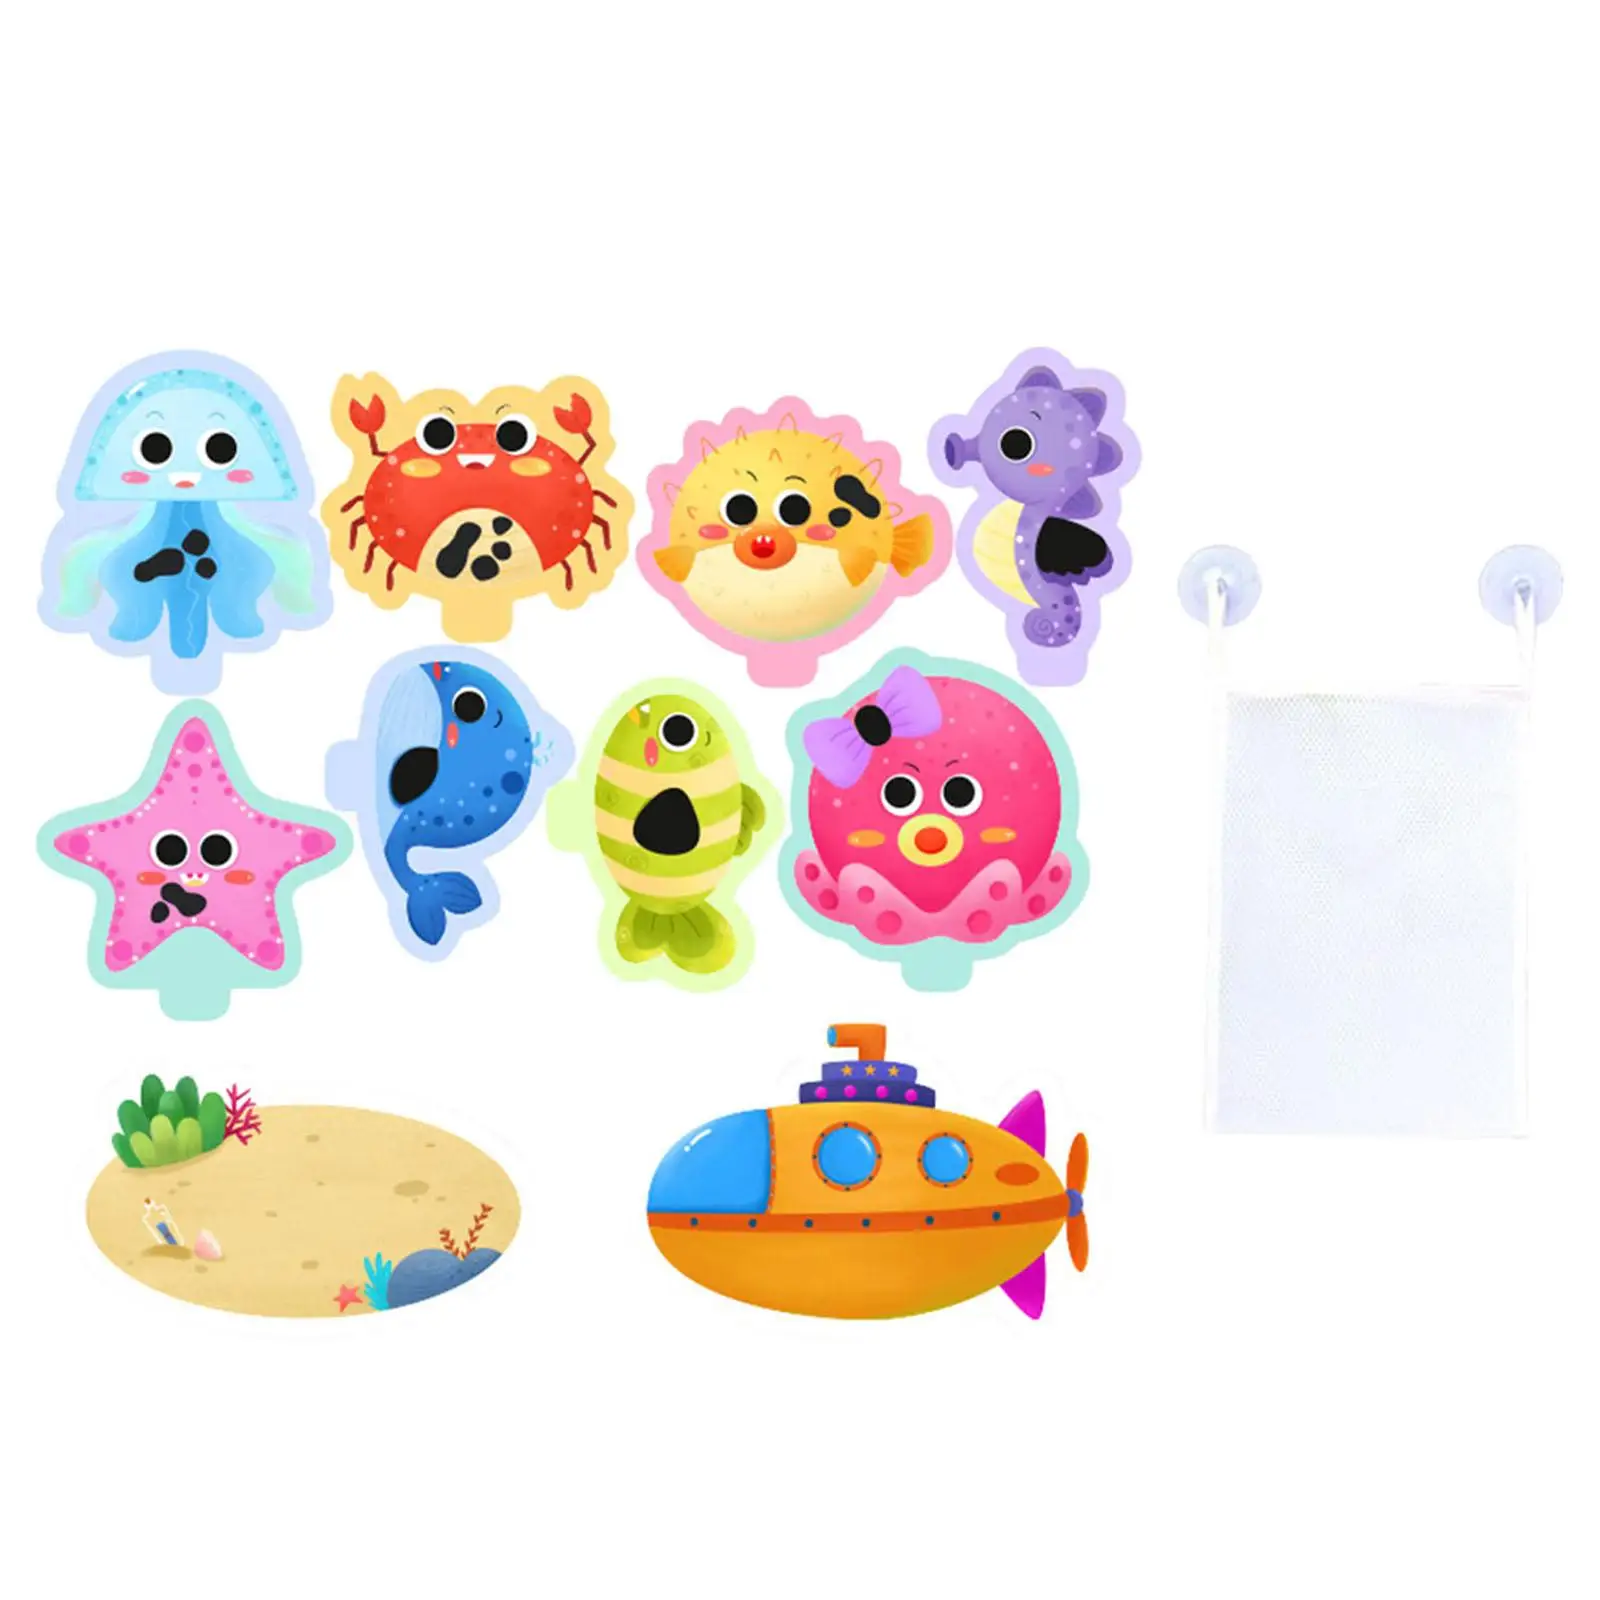 10 Pieces Early Education DIY Sticker Puzzles Toys with Storage Bag Bathtub Floating Bathing Toy for Children Toddler Girls Boys